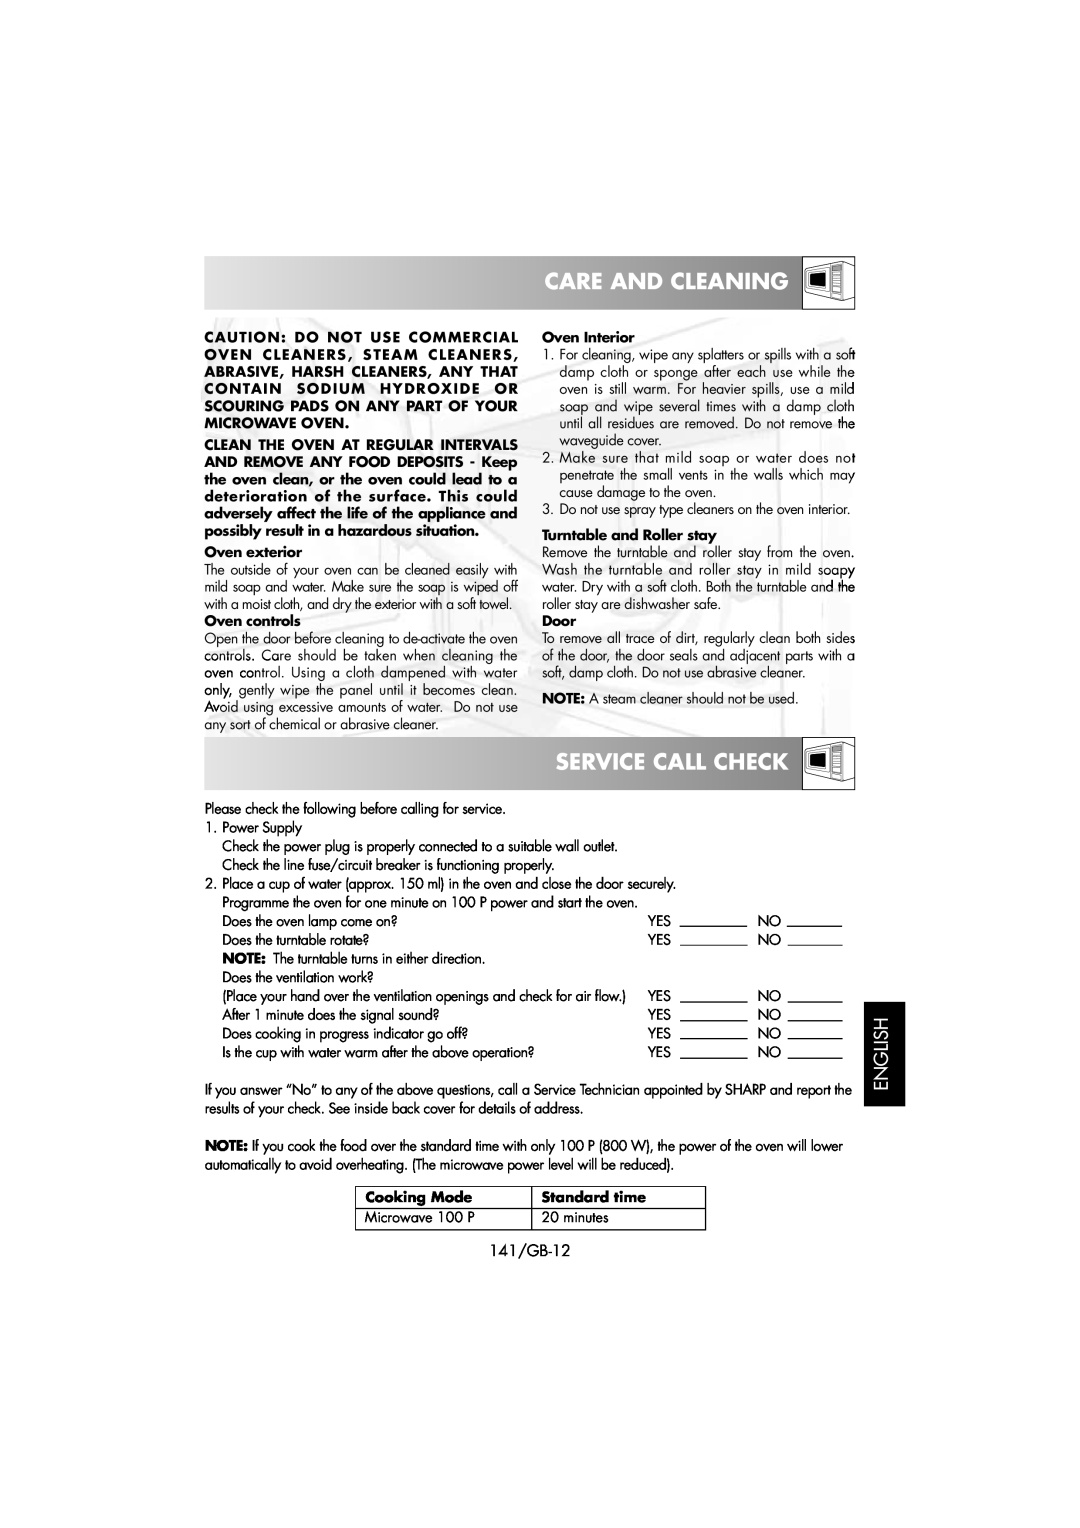 Sharp R-239 operation manual Care And Cleaning, Service Call Check, 141/GB-12, English 